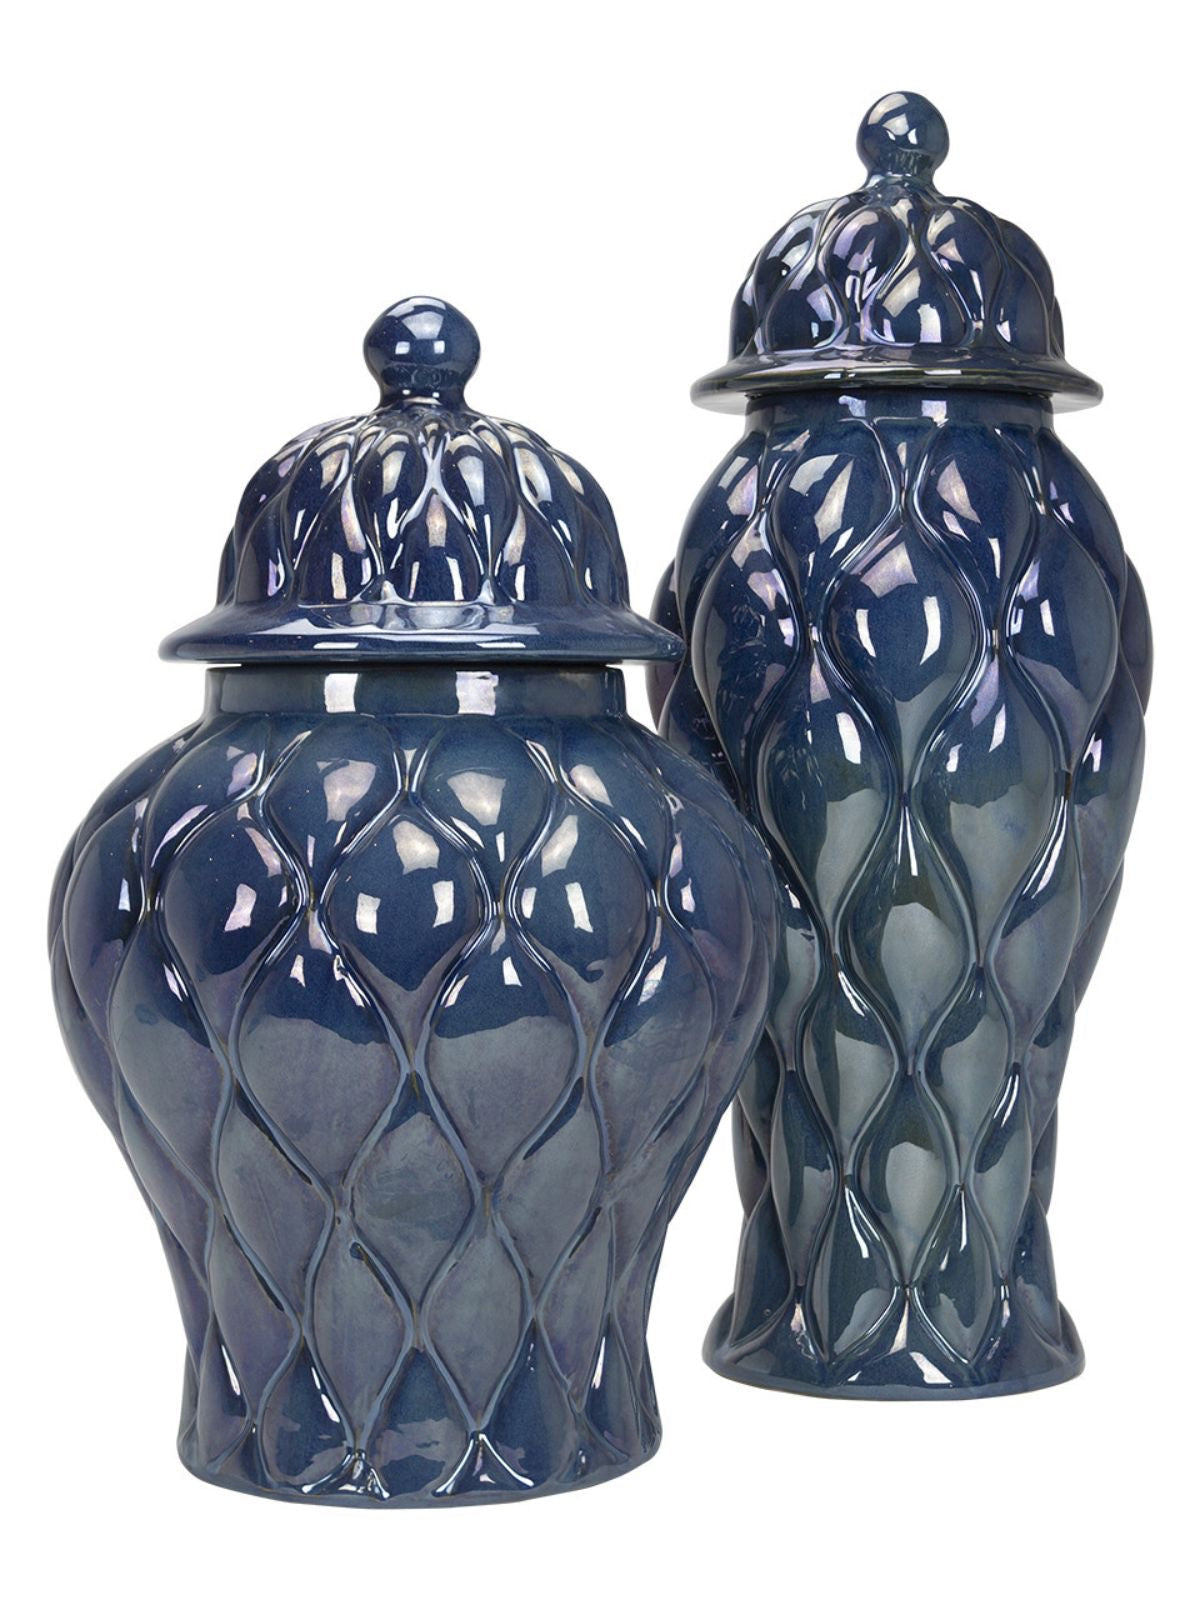 Sapphire Blue Porcelain Ginger Jar with Quilt Pattern available in 2 Sizes.